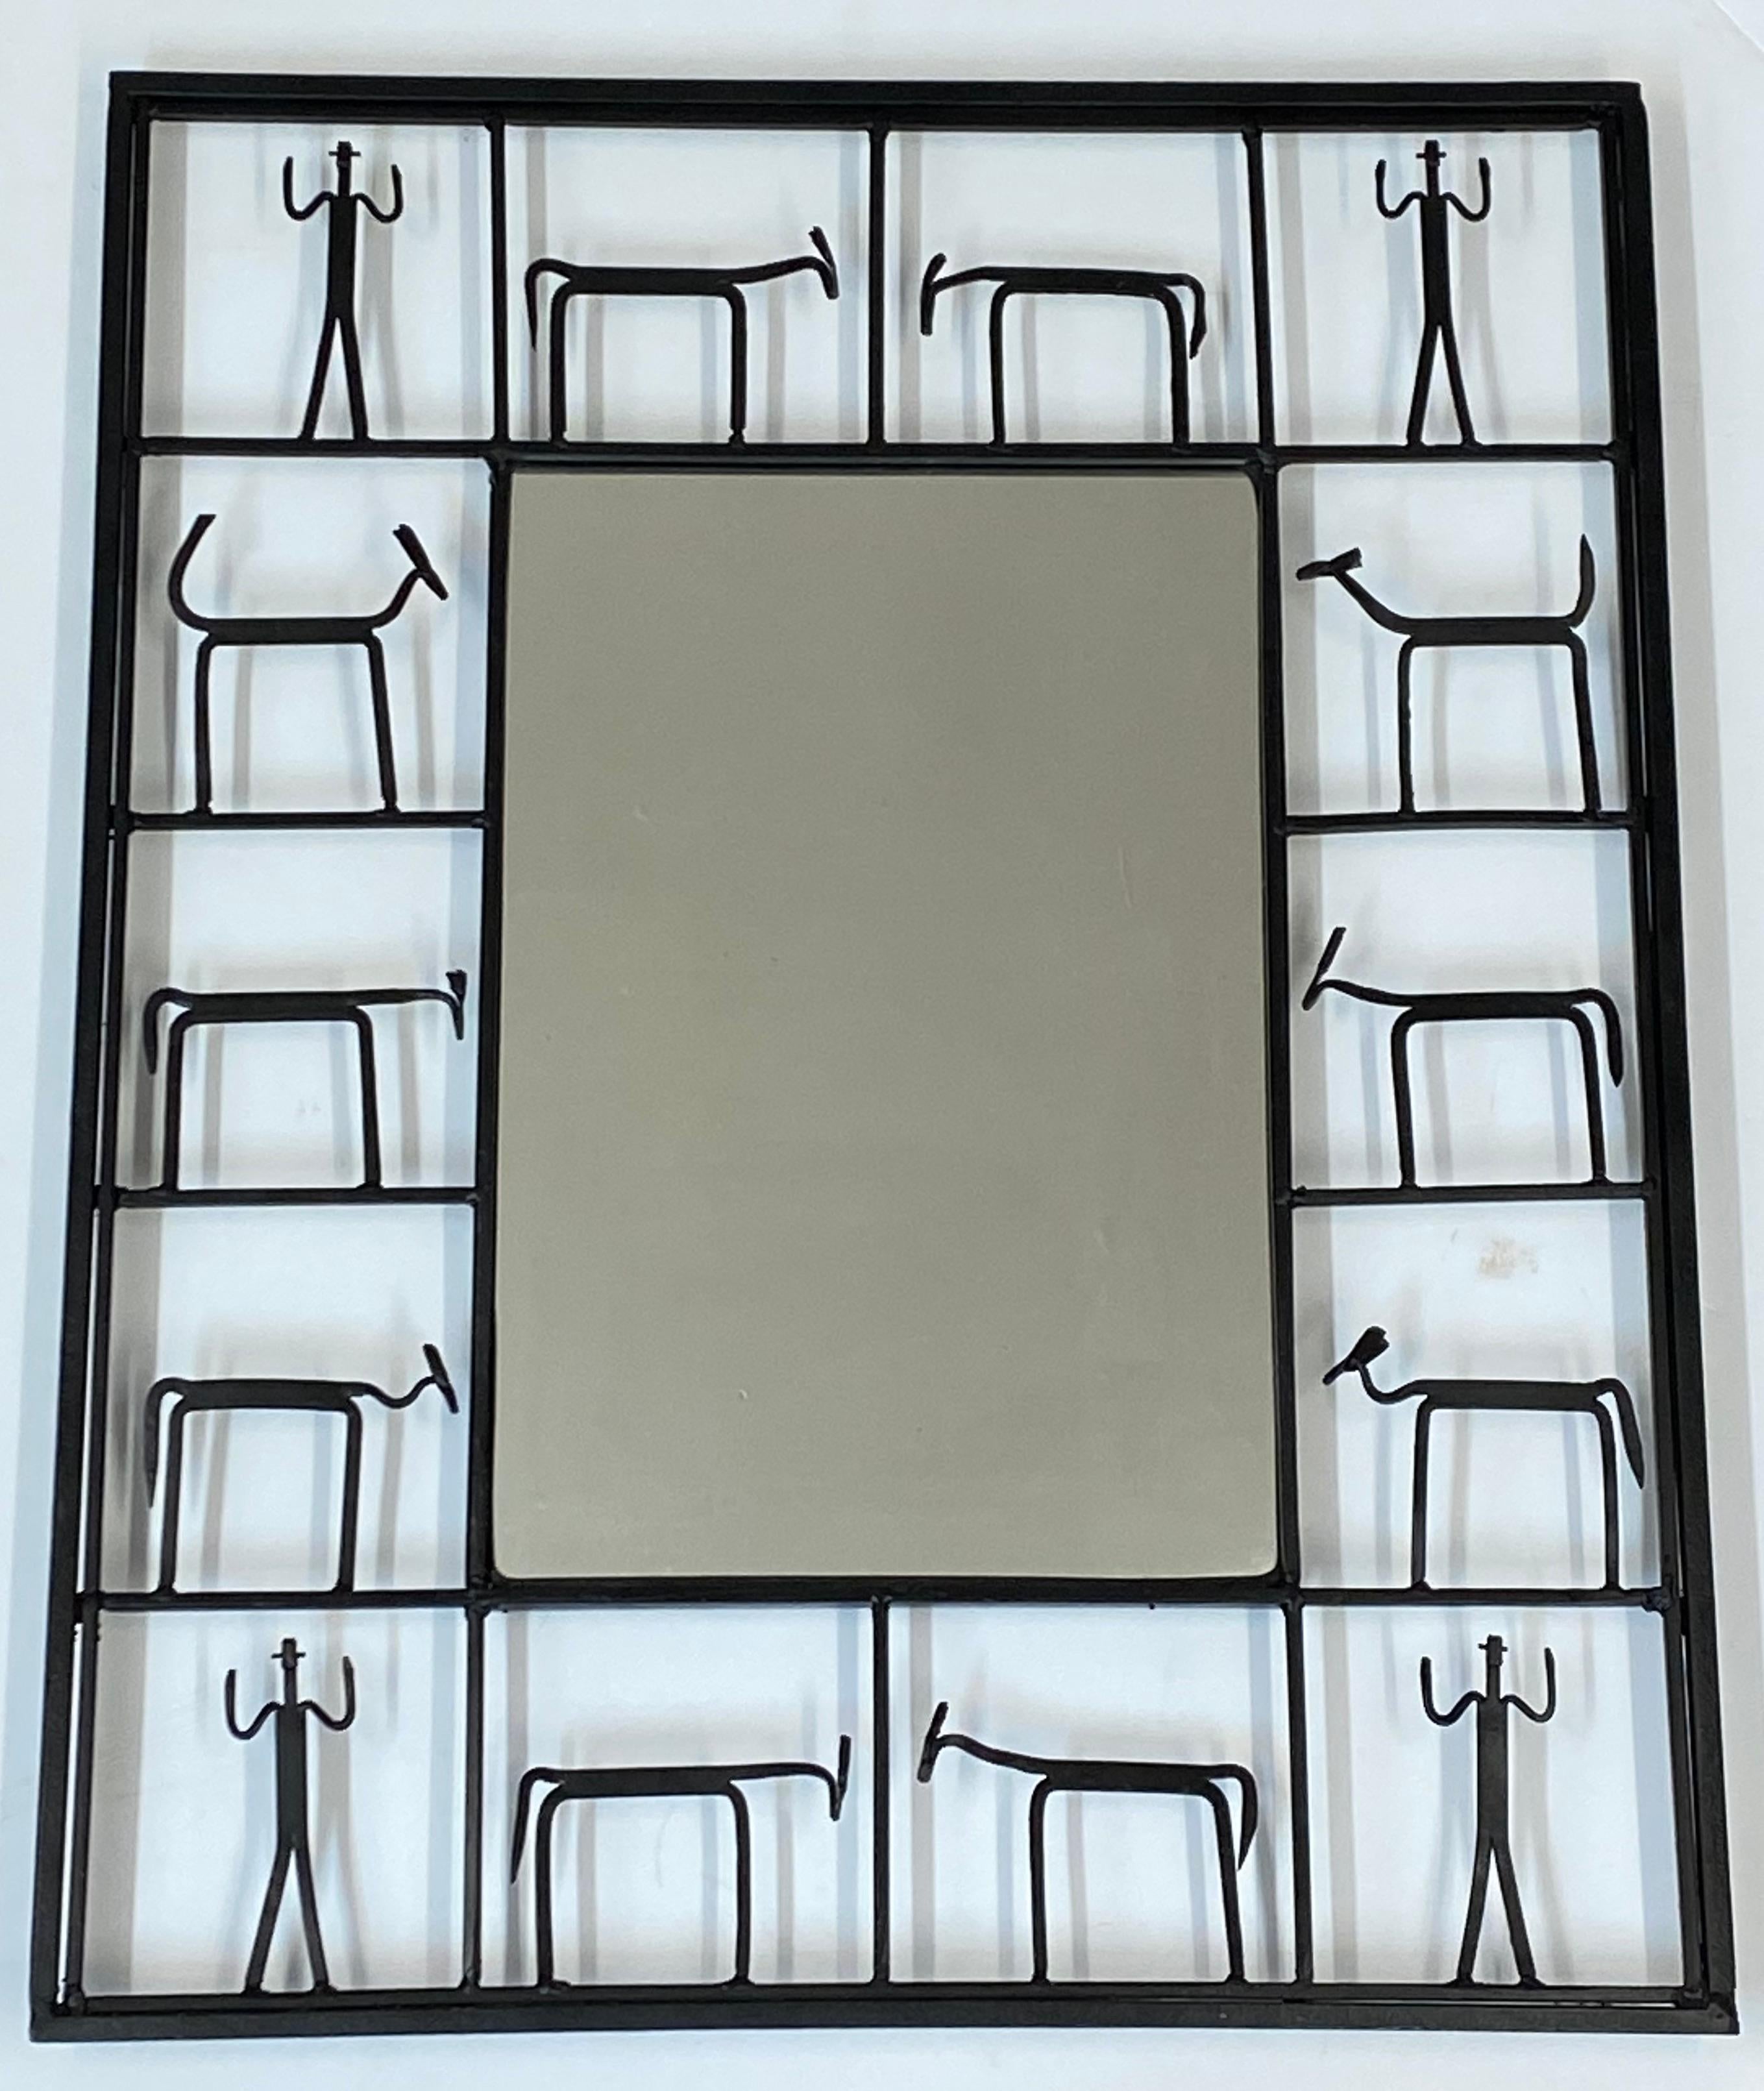 Pair of Frederick Weinberg animal & human stick figure iron framed mirrors, C.1950

Outstanding pair of mirrors

Hand crafted mirrors with an assortment of human and animal stick figures

Each mirror measures 12